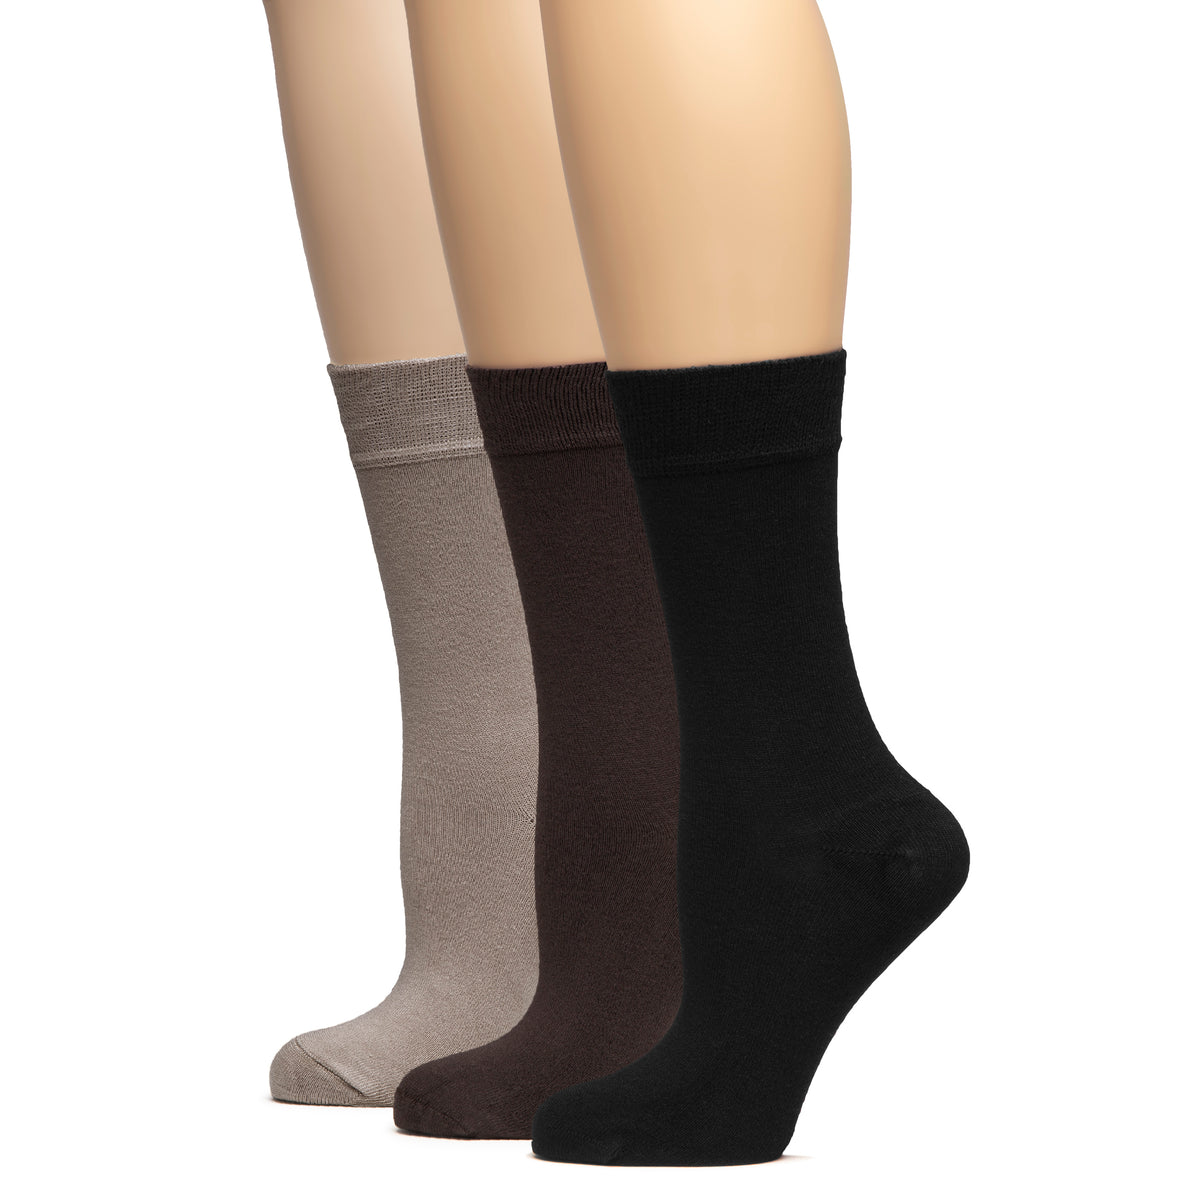 A trio of women's bamboo crew socks in classic black, grey, and tan hues. Perfect for everyday wear and ultimate comfort.